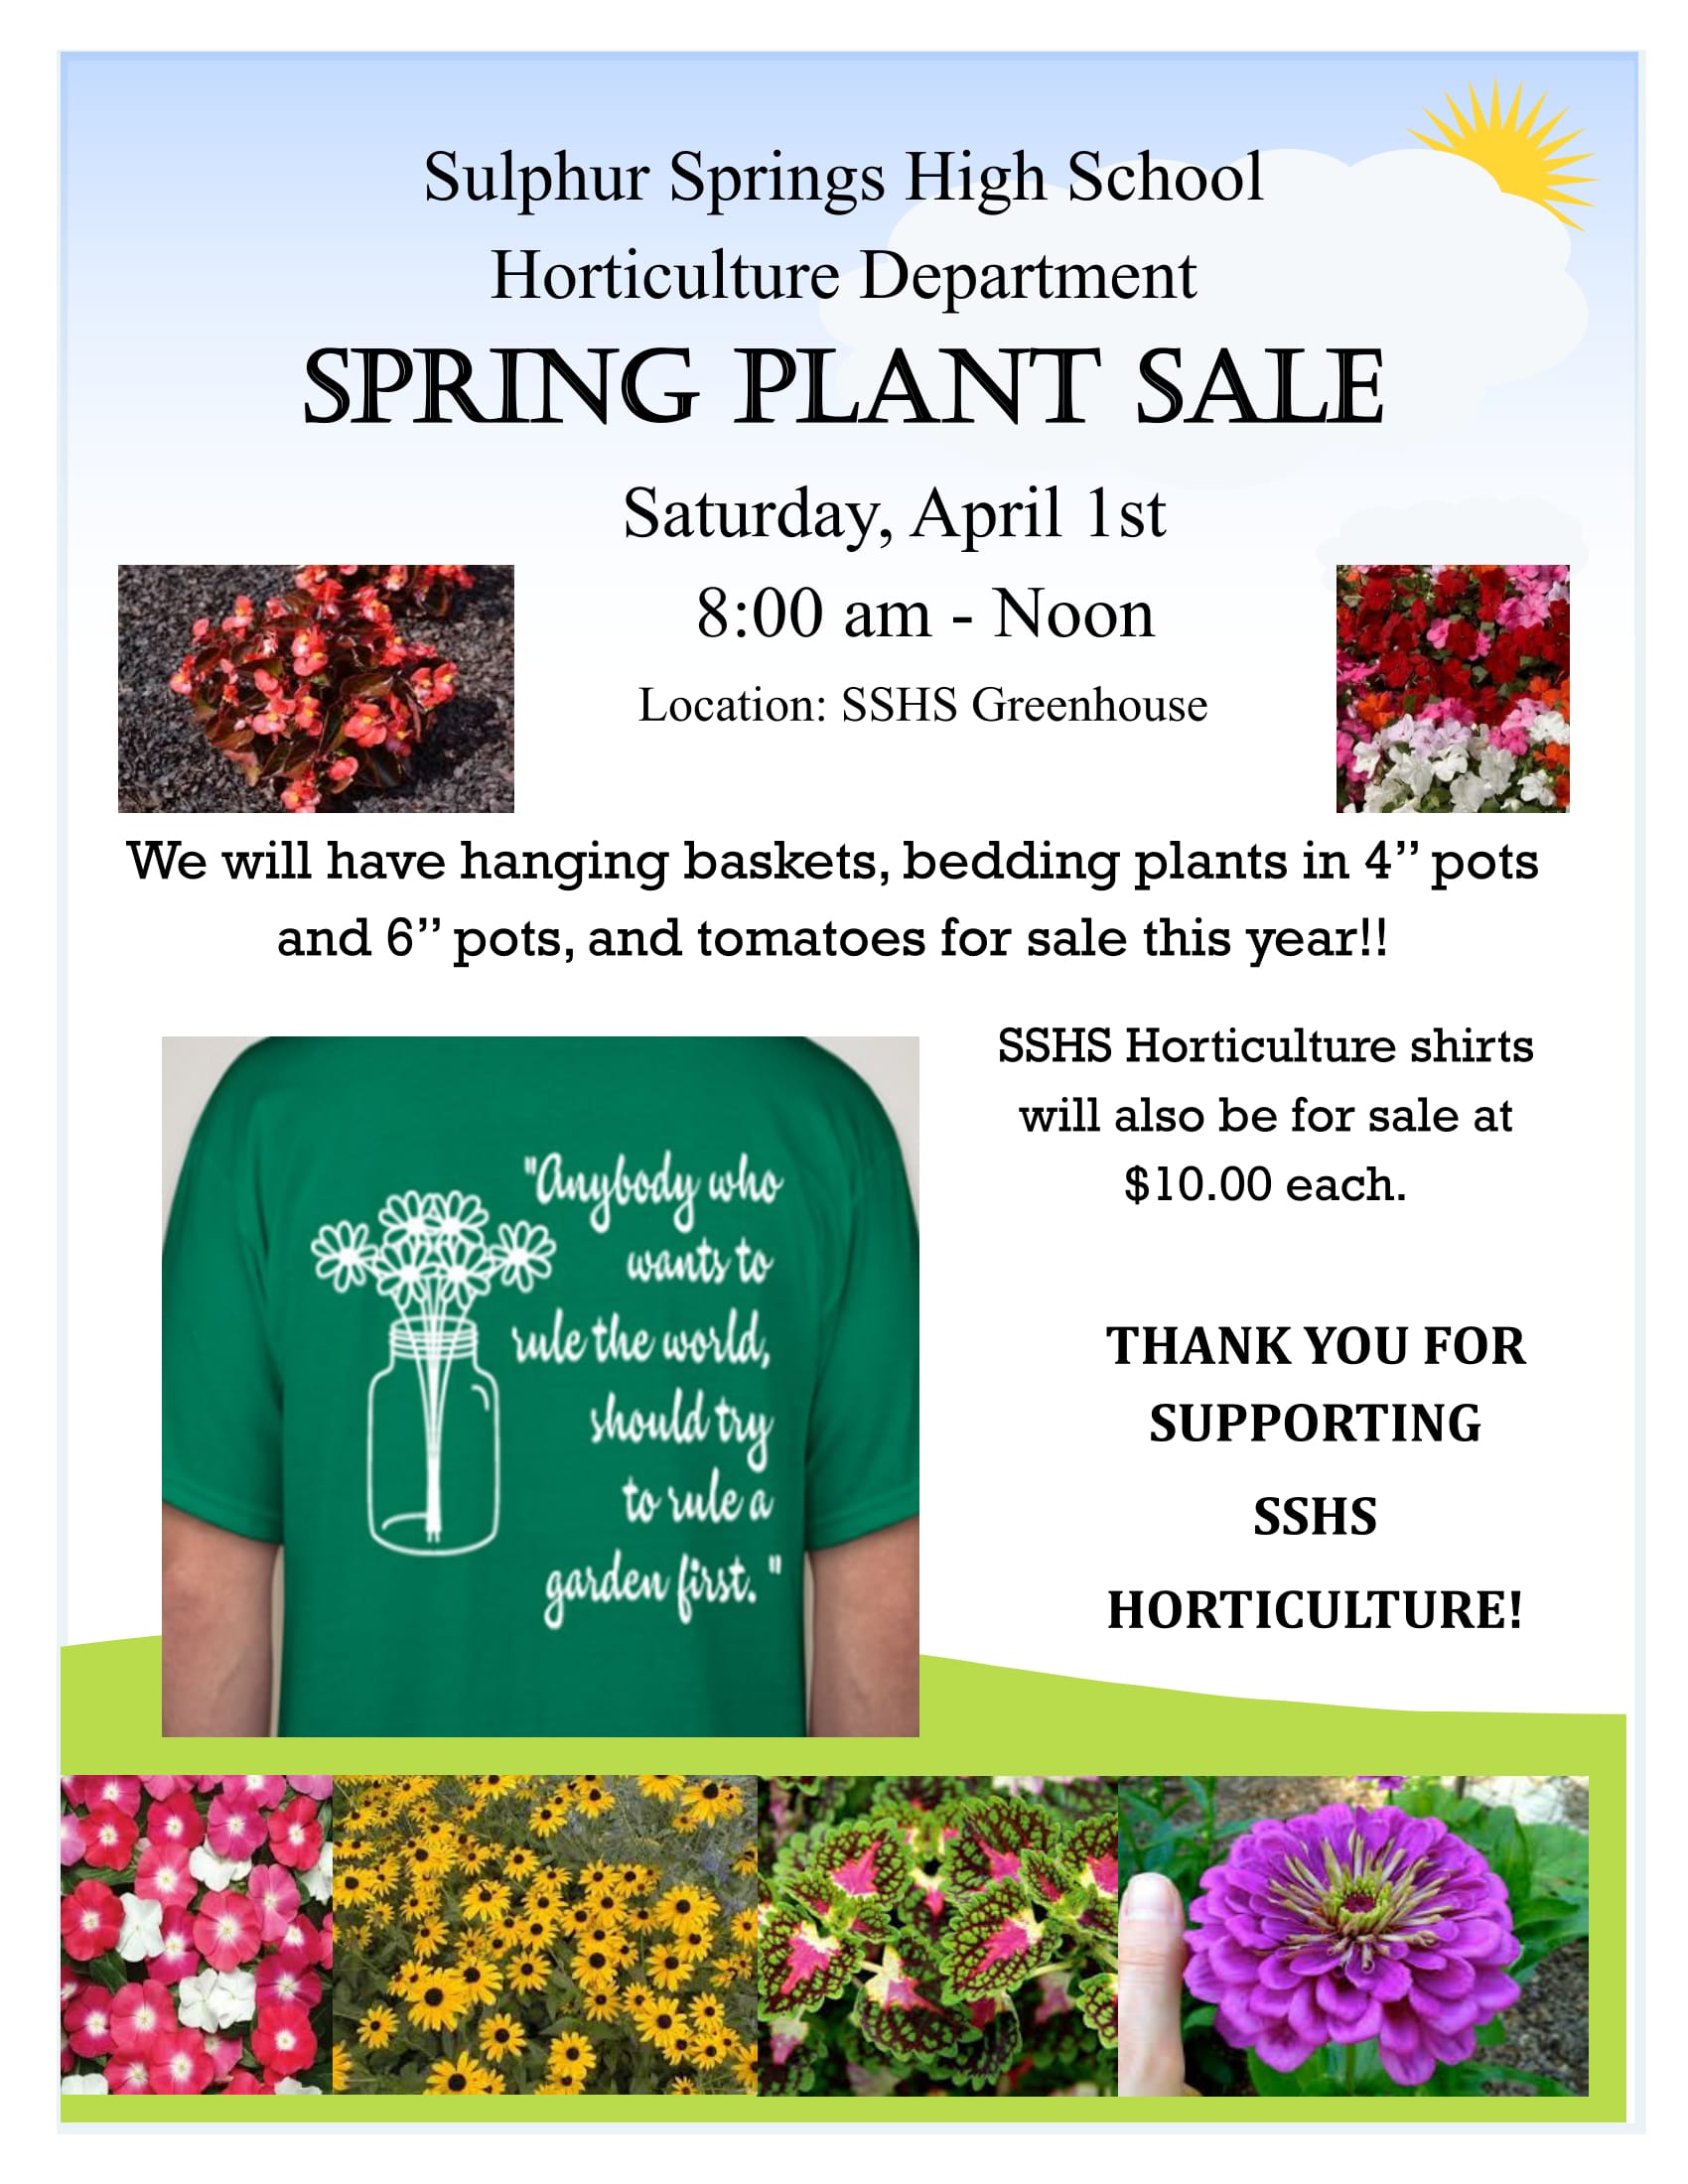 SSHS Horticulture Department Spring Plant Sale This Saturday